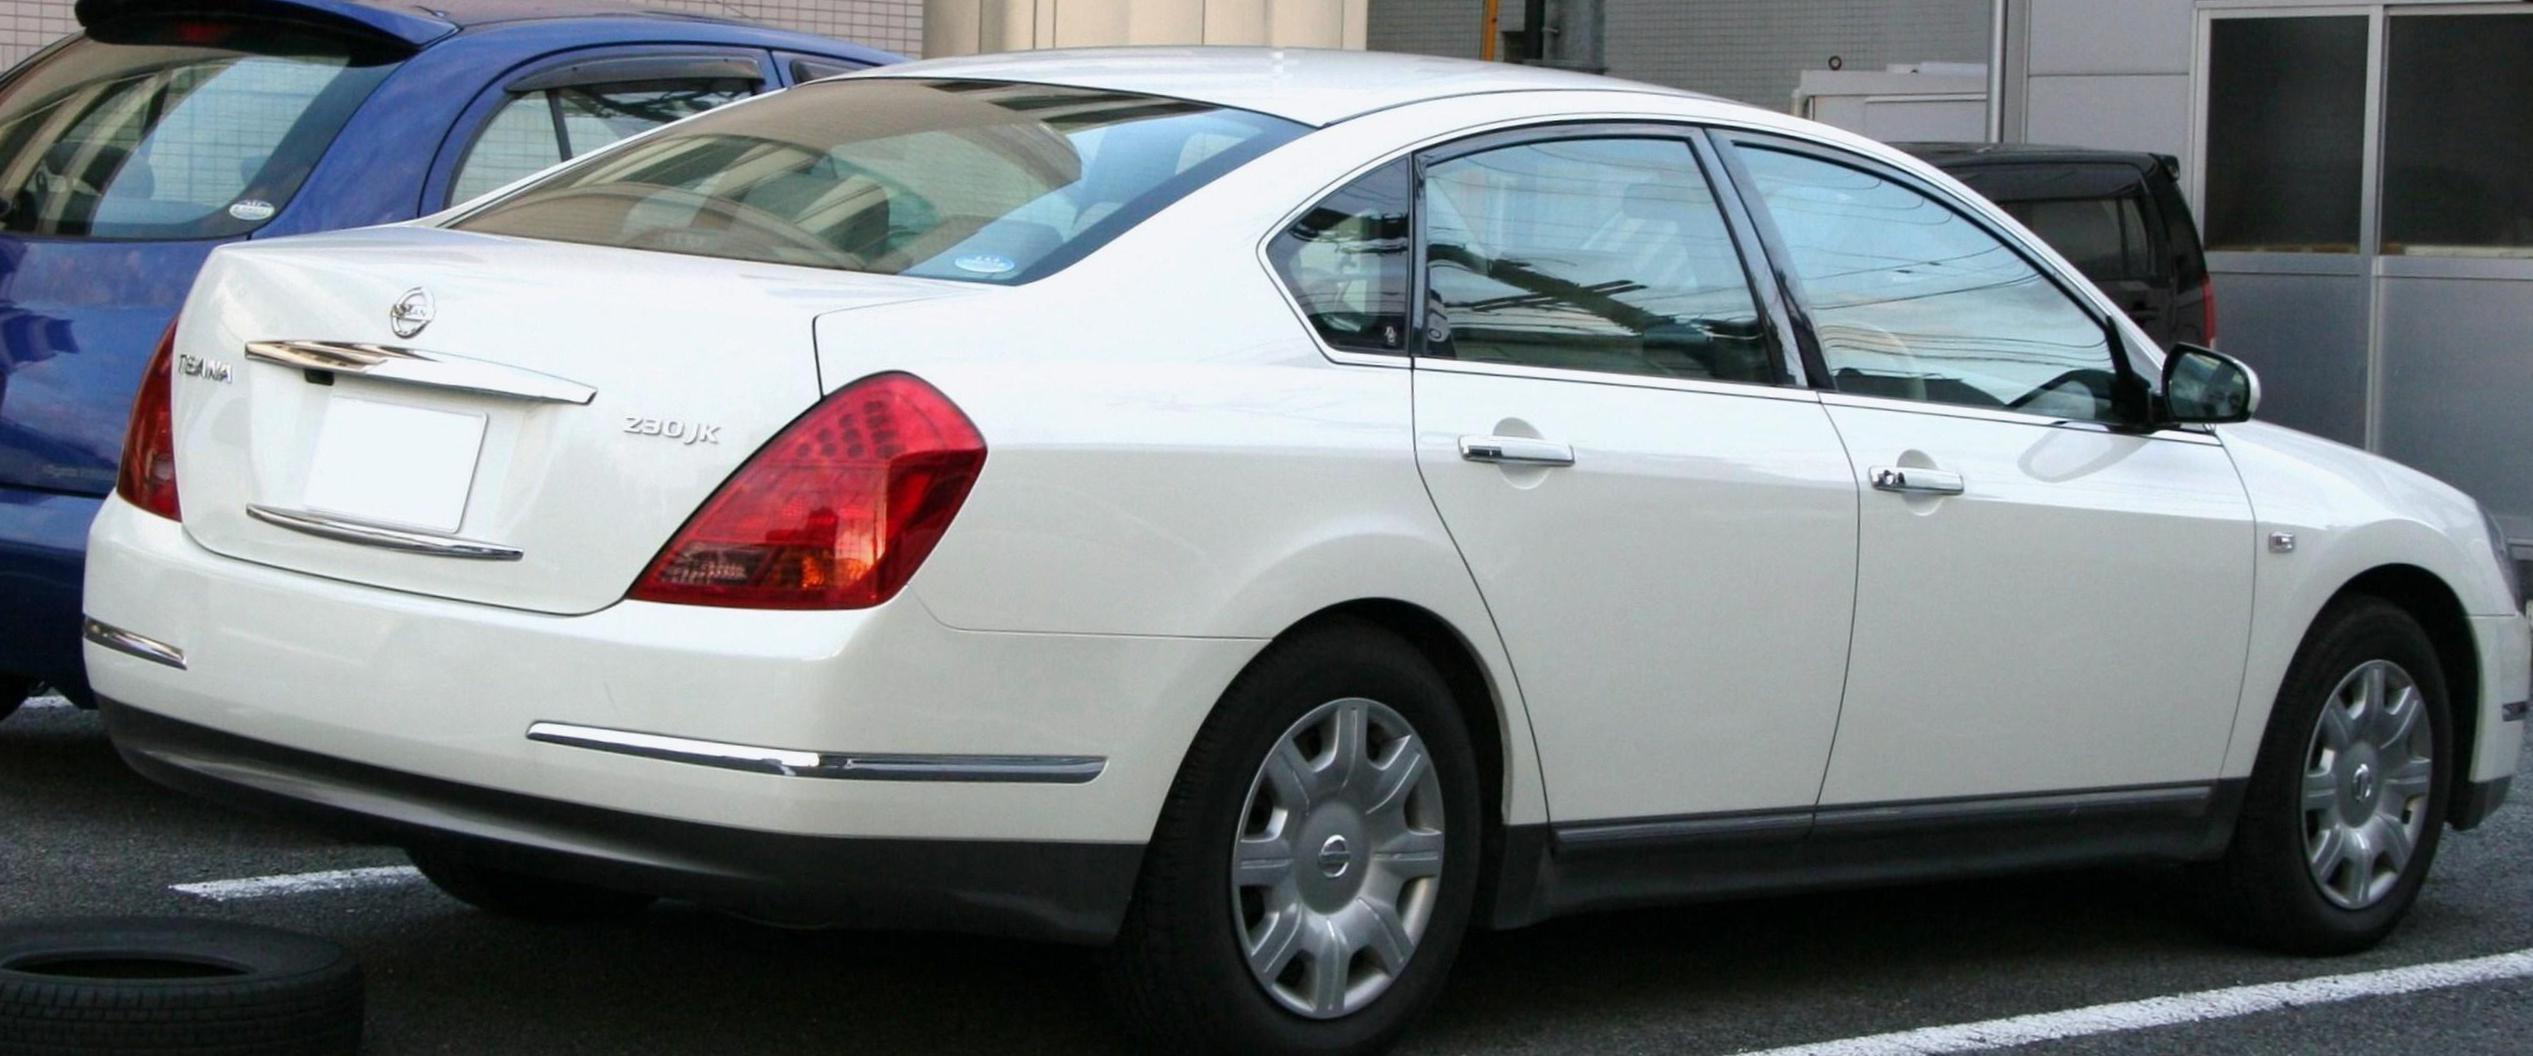 Nissan Teana Specifications 2015